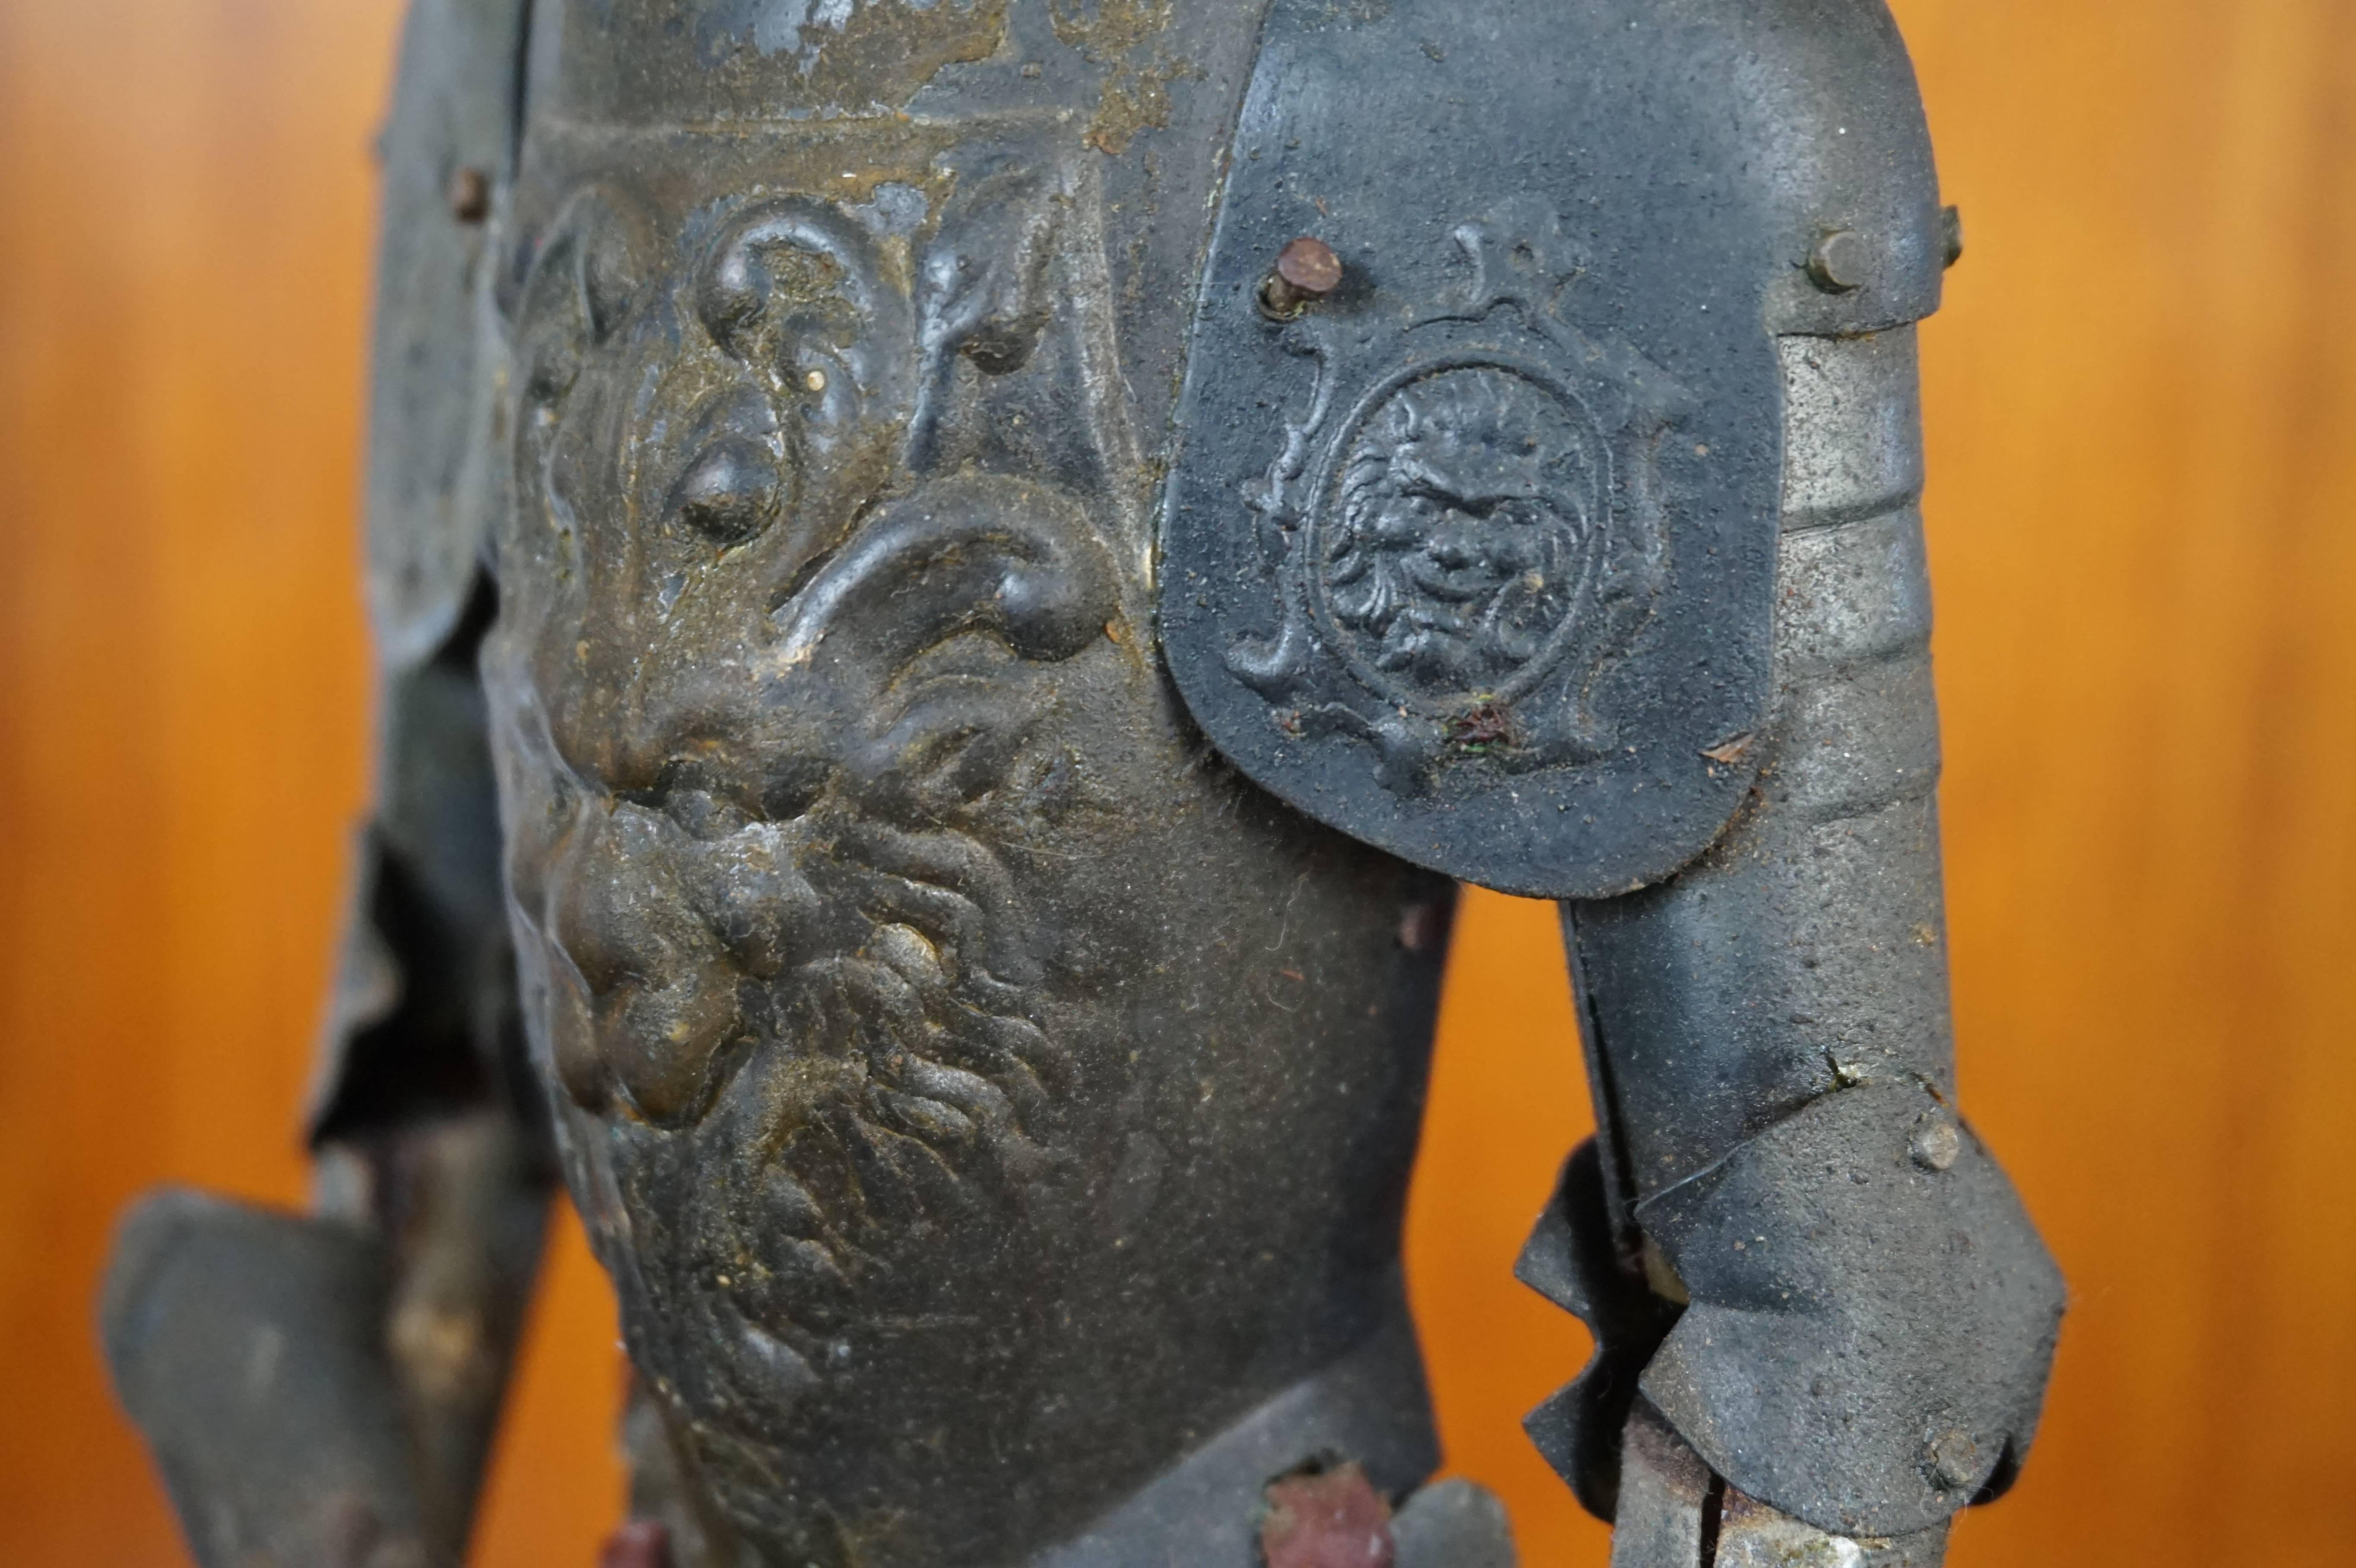 European Antique Miniature Medieval Style Knight of Tin with Embossed Lion Heads